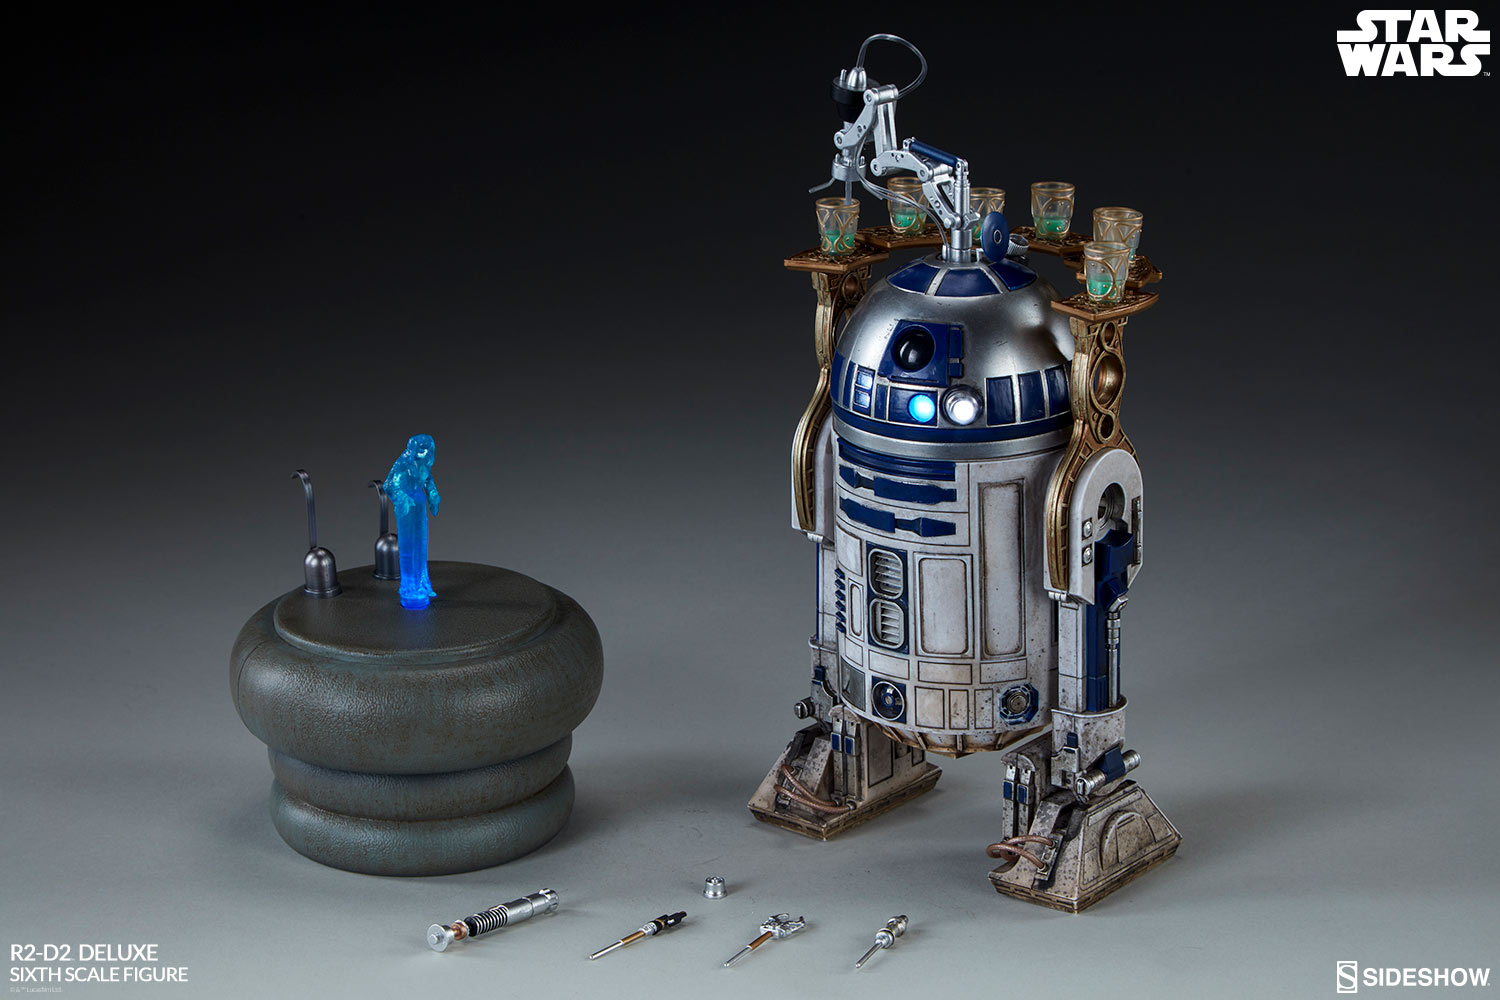 r2d2 collectibles